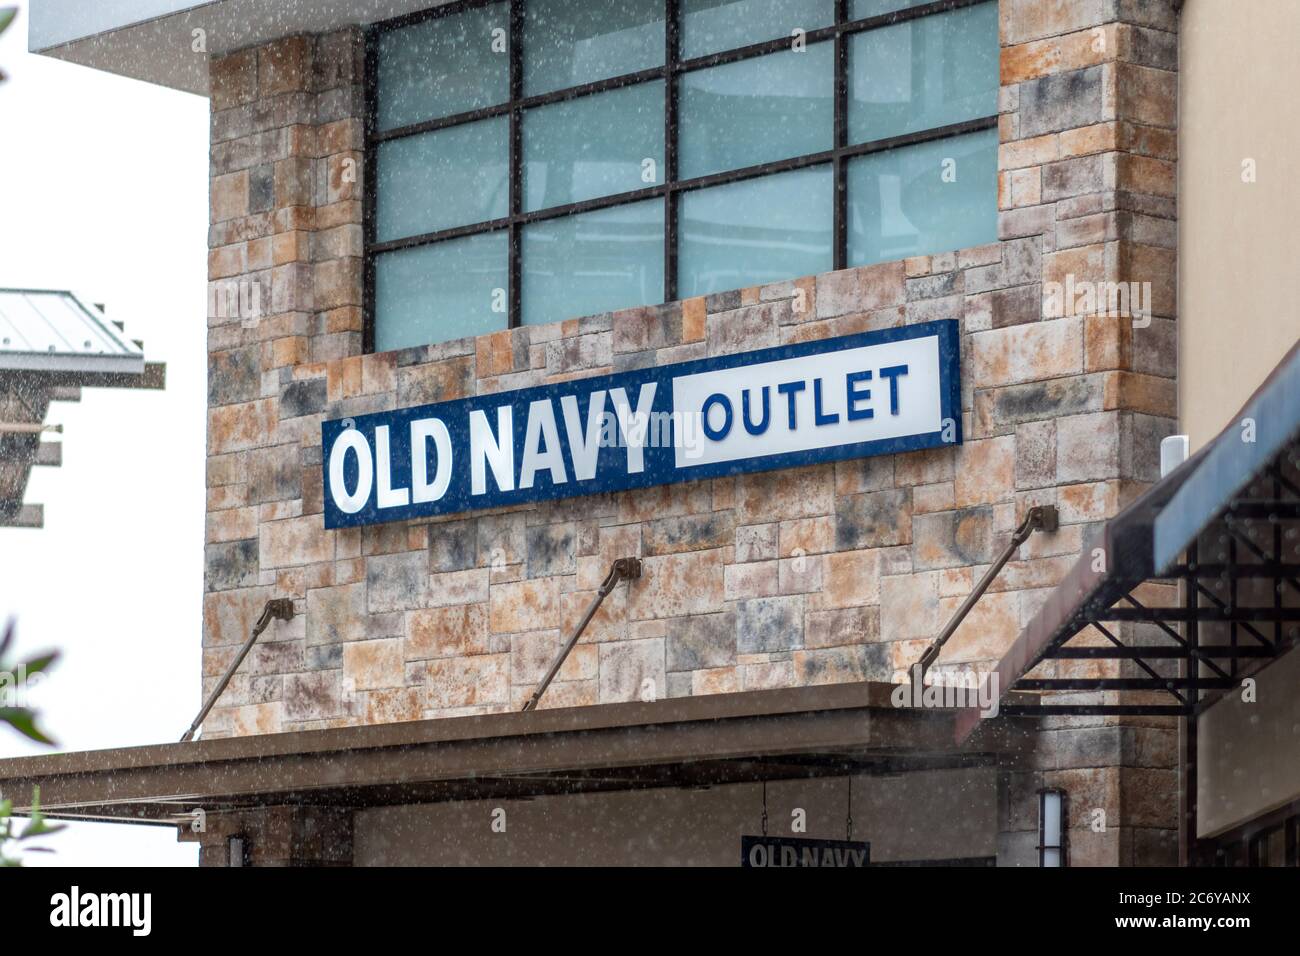 Clarksburg, Maryland / USA - July 12 2020: Rainy sign at the exterior storefront of Old Navy Outlet at Clarksburg Premium Outlets in Maryland. Stock Photo